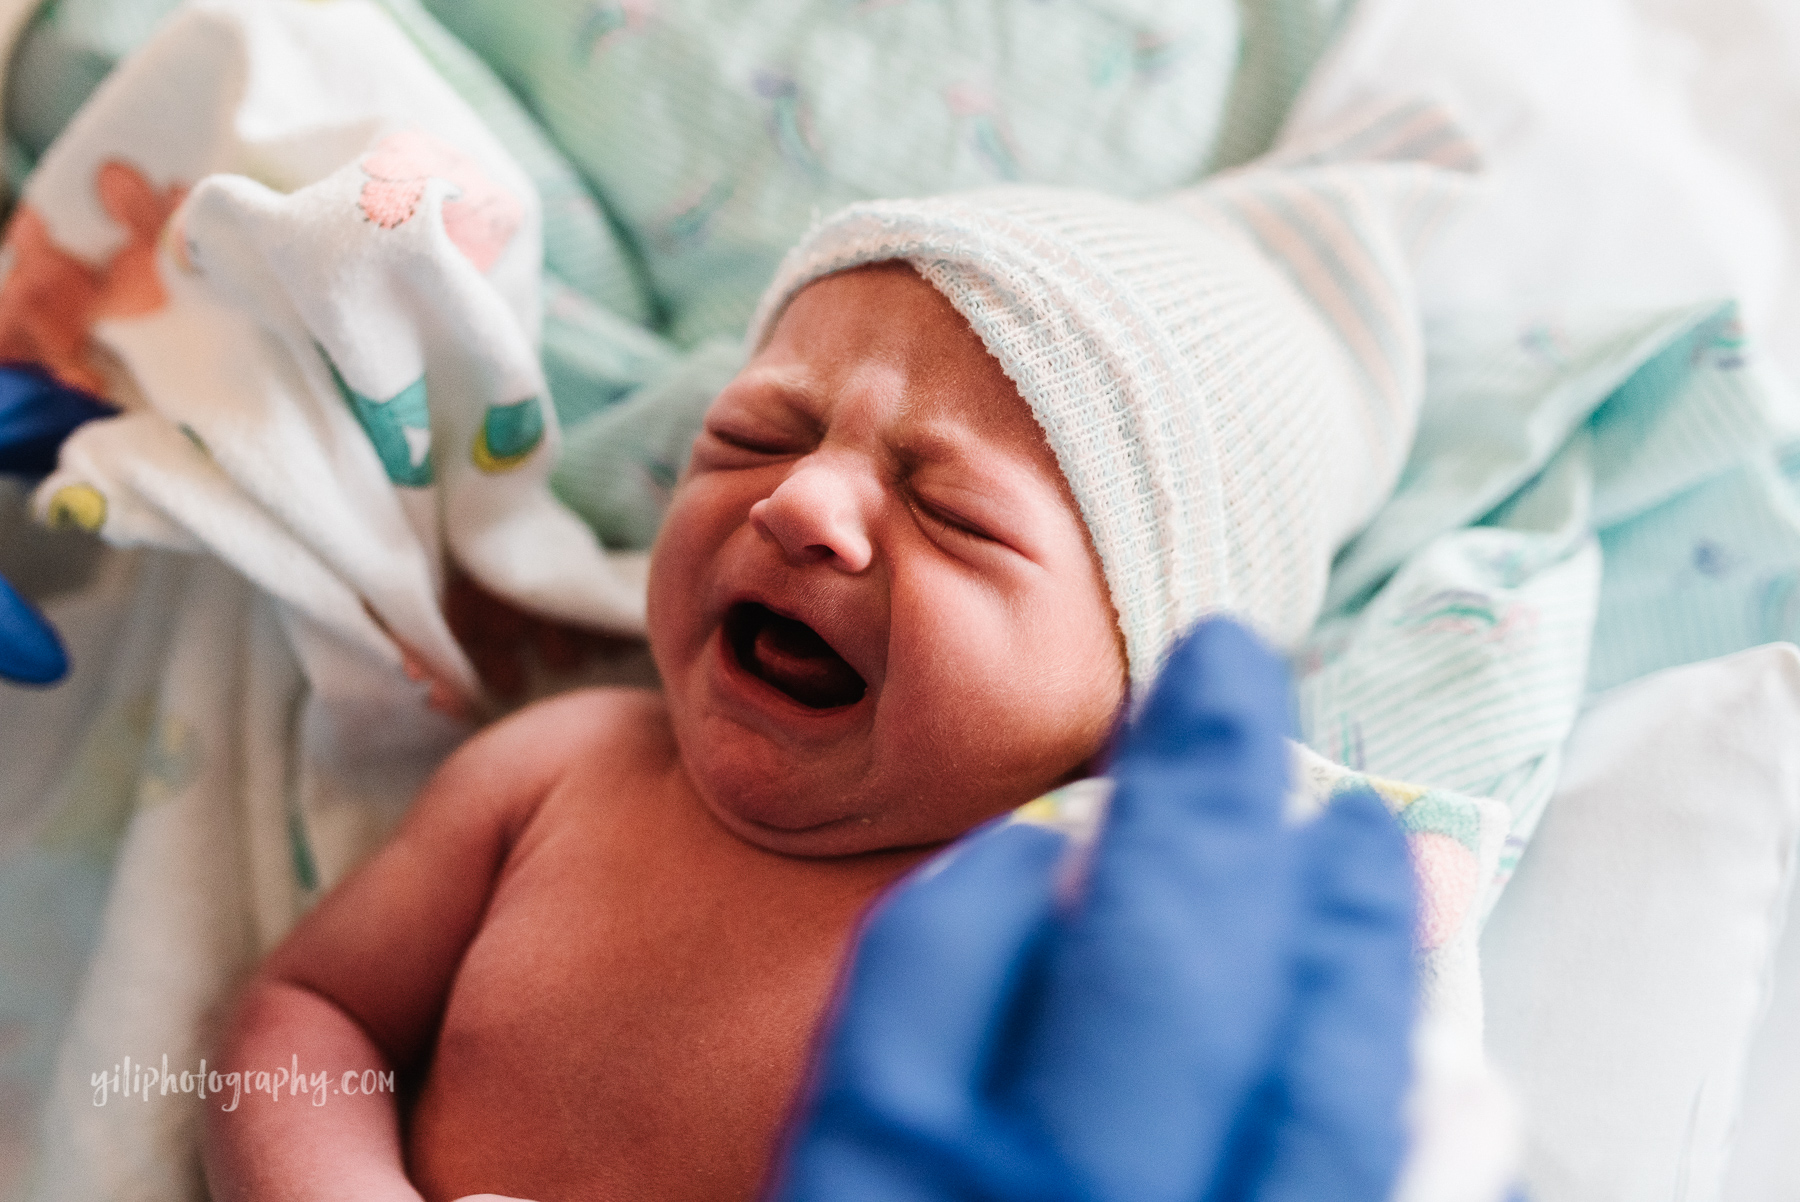 close up of newborn baby with hat crying while gloved hand assists nursing